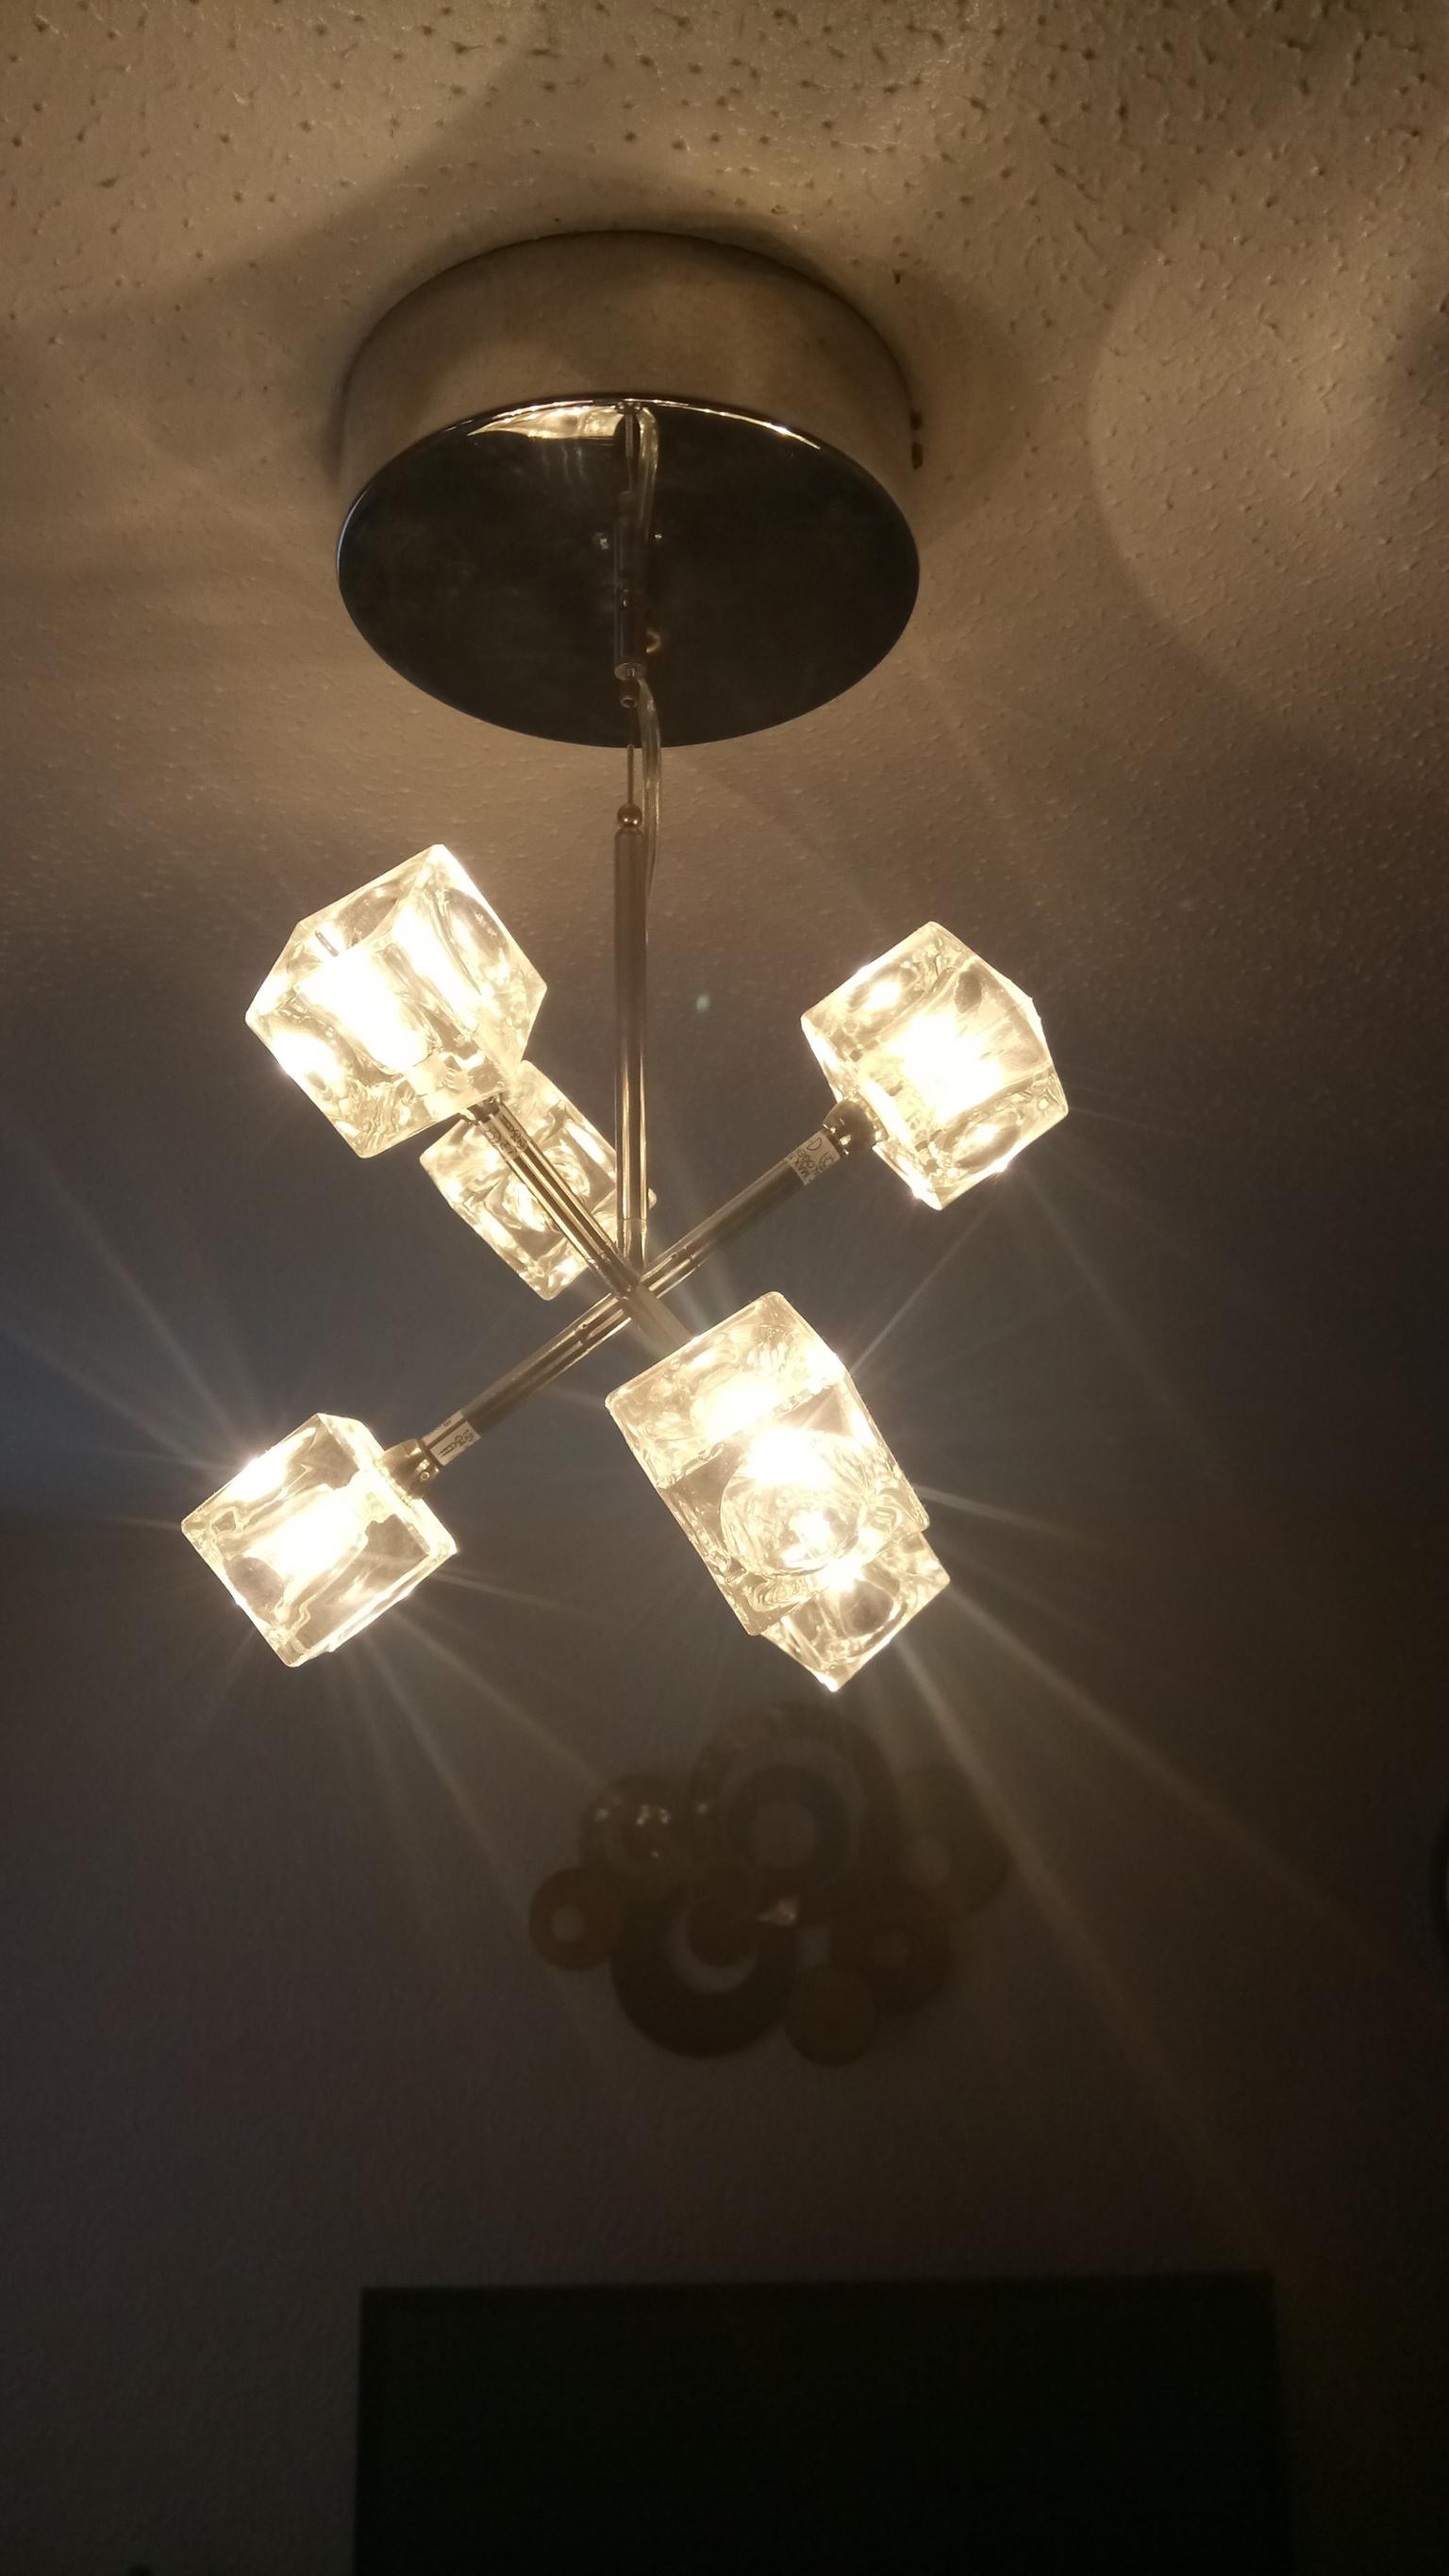 FOUR IKEA ICE CUBE LIGHTS in LS1 Leeds for £50.00 for sale ...